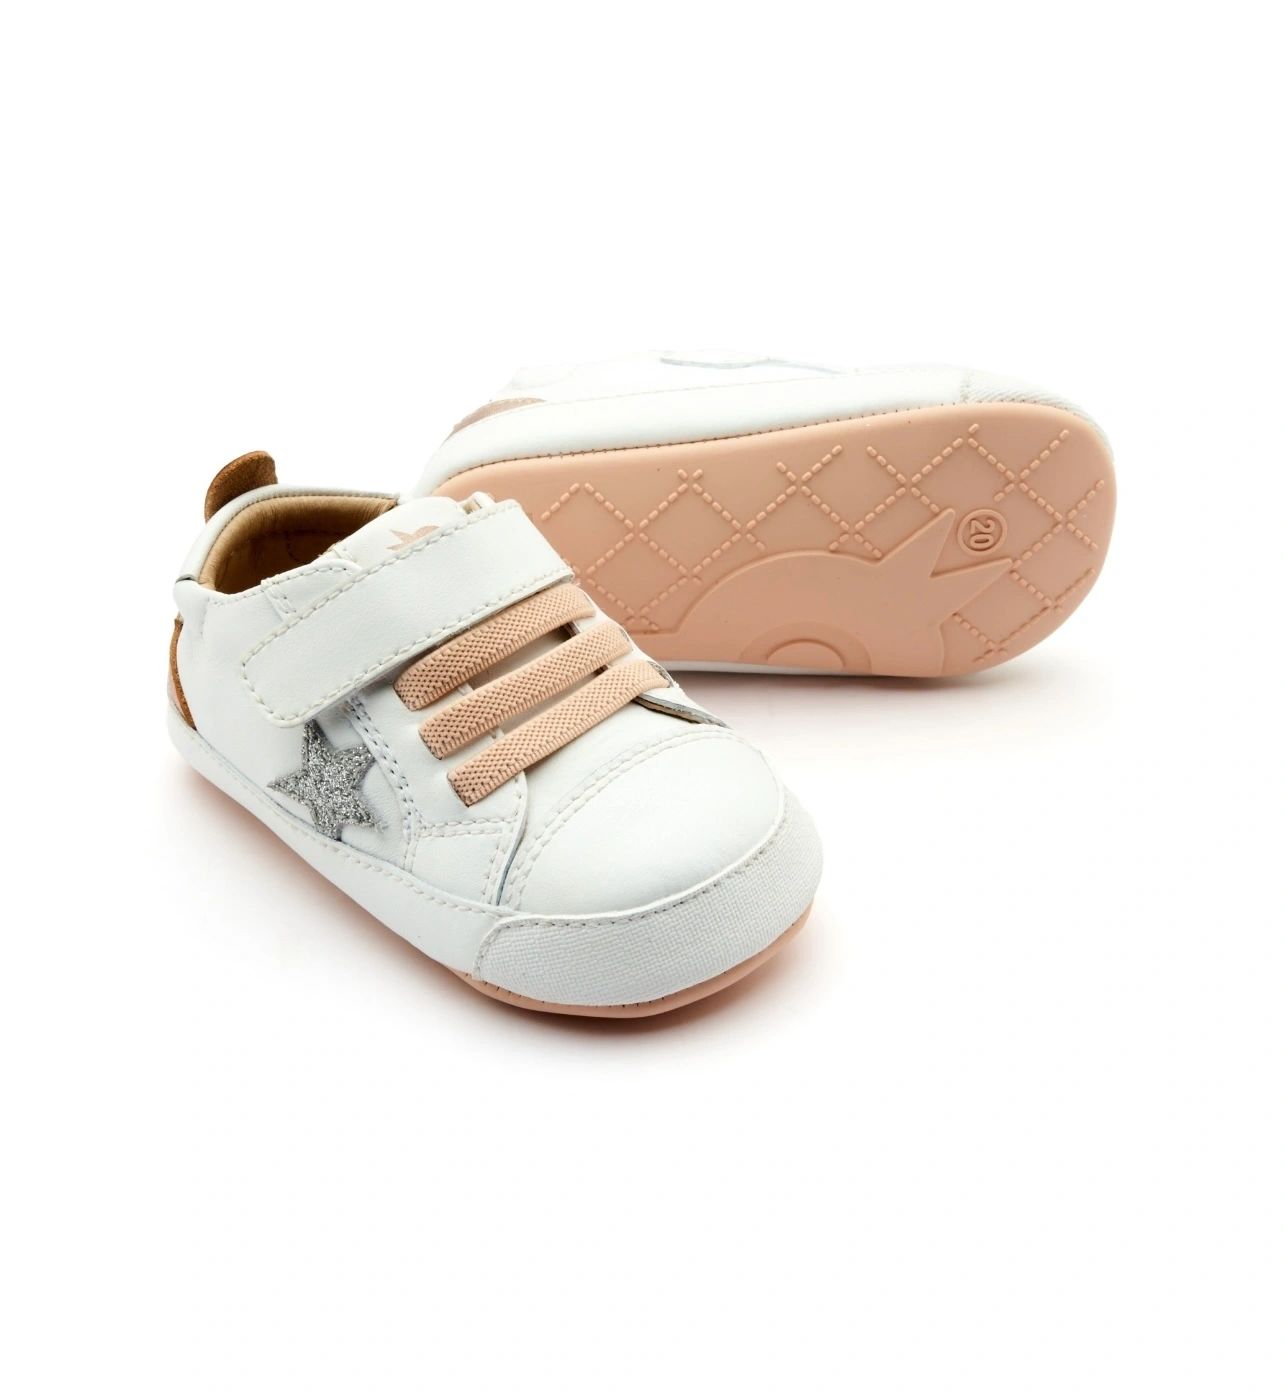 Oldsoles Platinum Bub Baby Star Girls Soft Sole Sneakers Tennis Shoes - SNOW / COPPER / GLAM ARGENT / COPPER SOLE